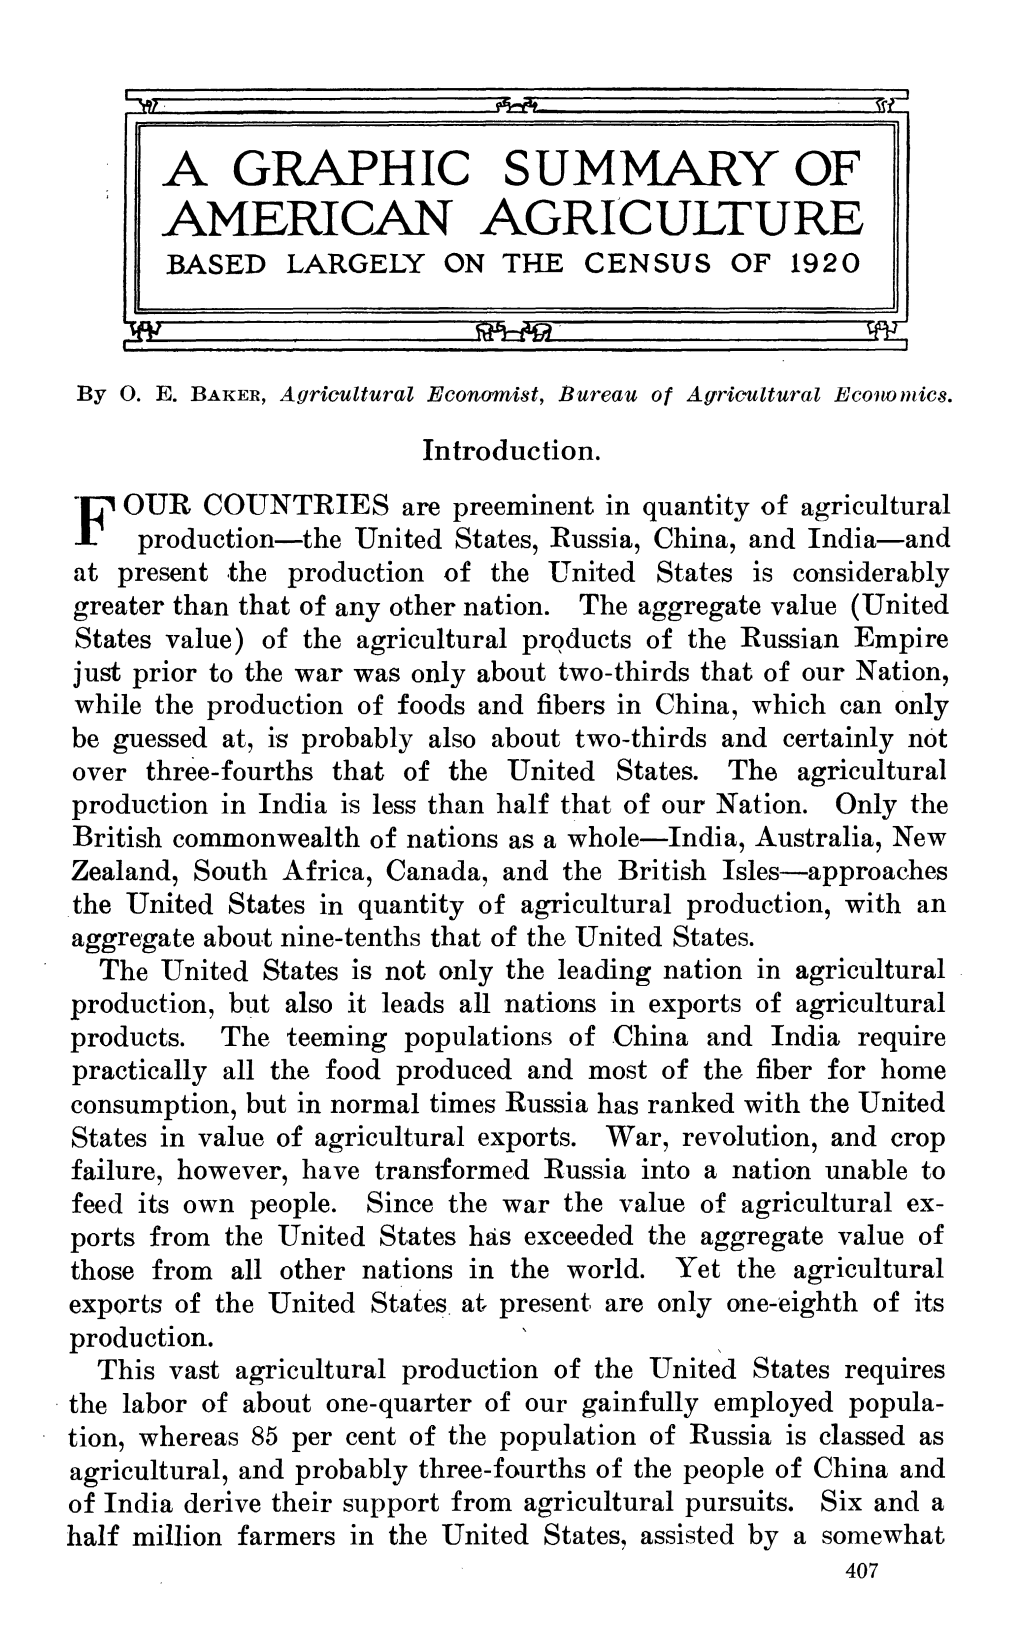 A Graphic Summary of American Agriculture Based Largely on the Census of 1920